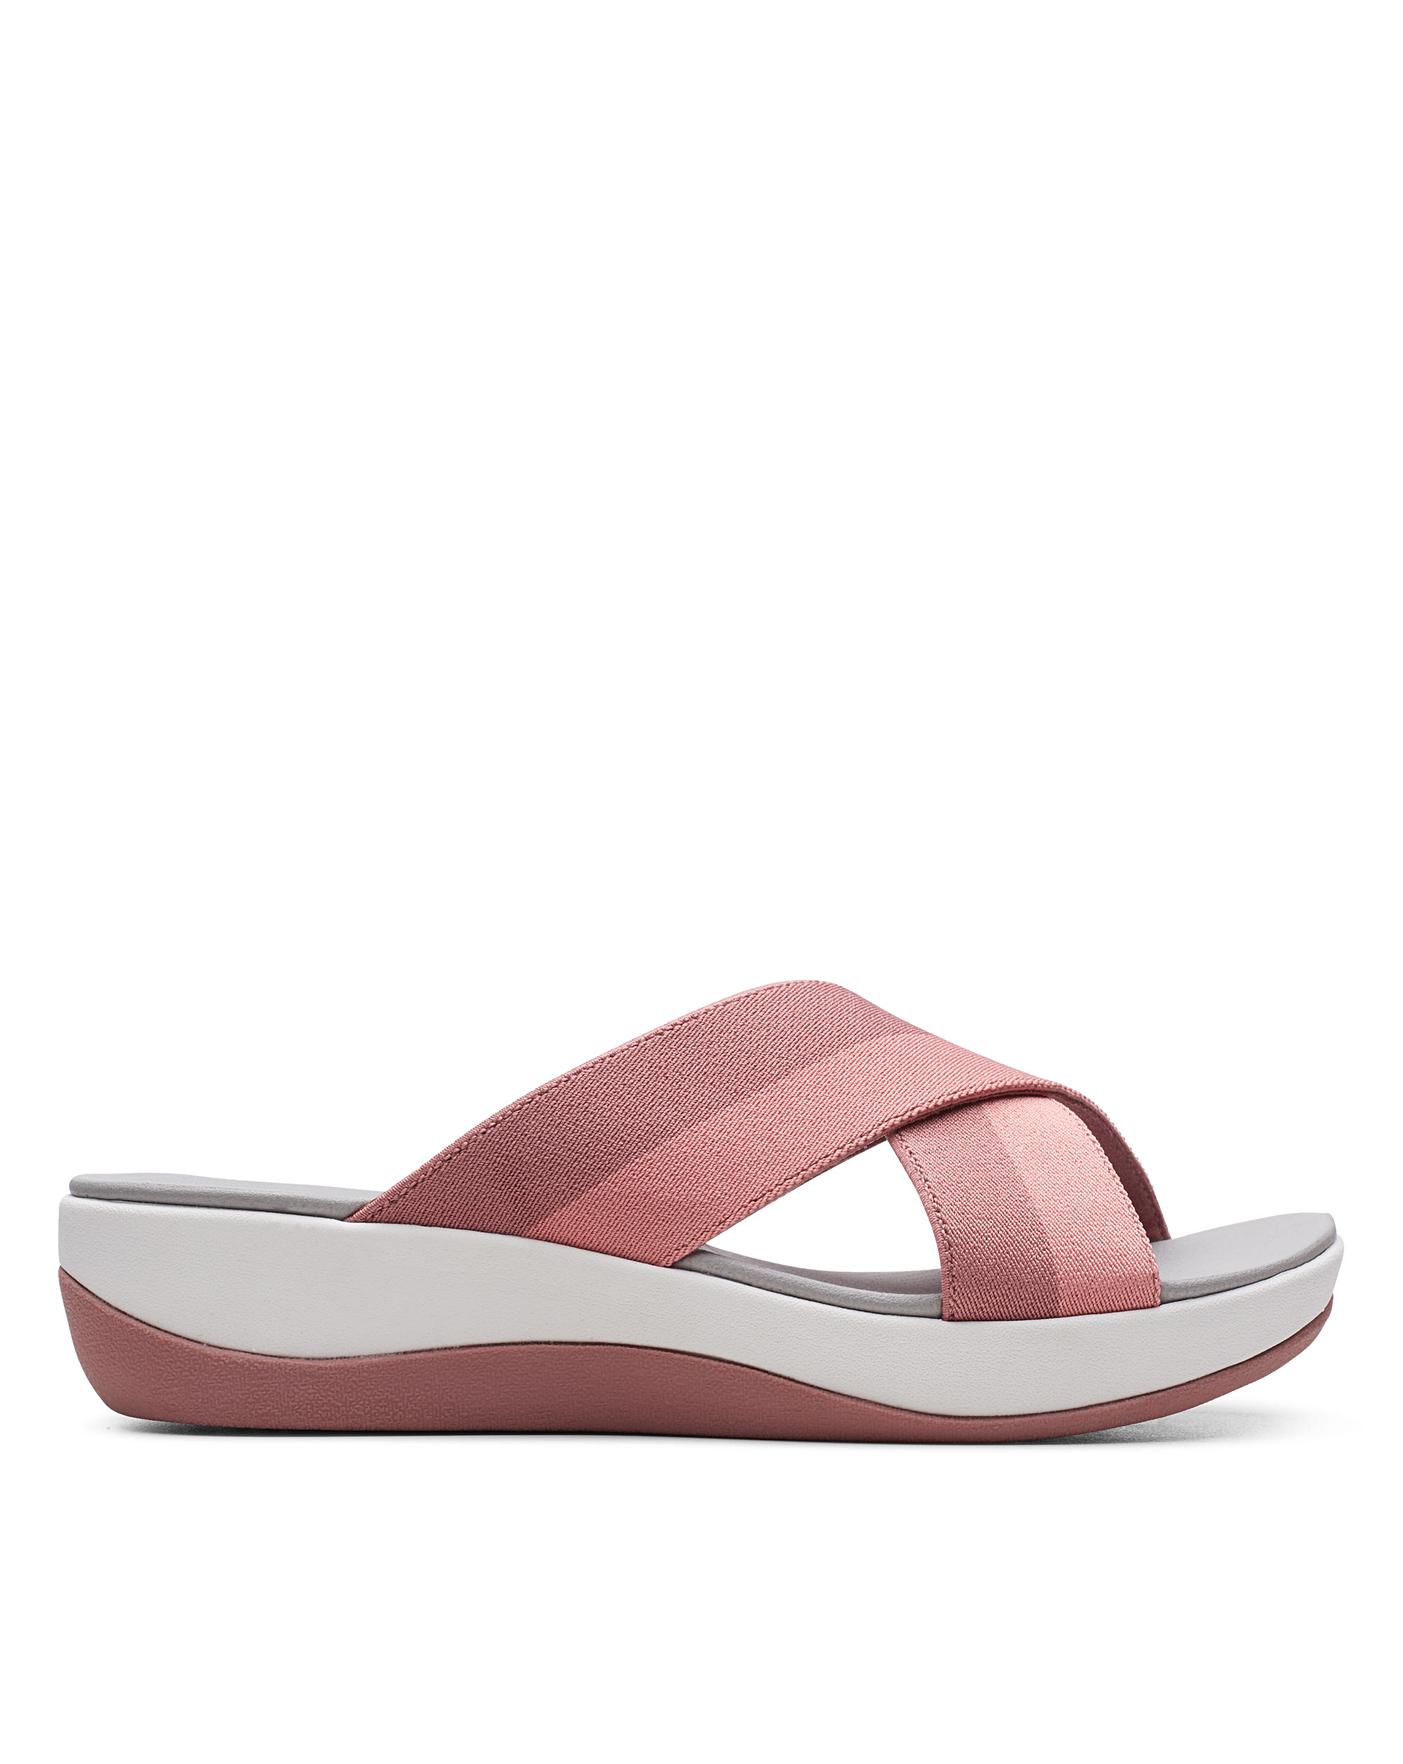 Clarks Arla Elin D Fitting | Oxendales